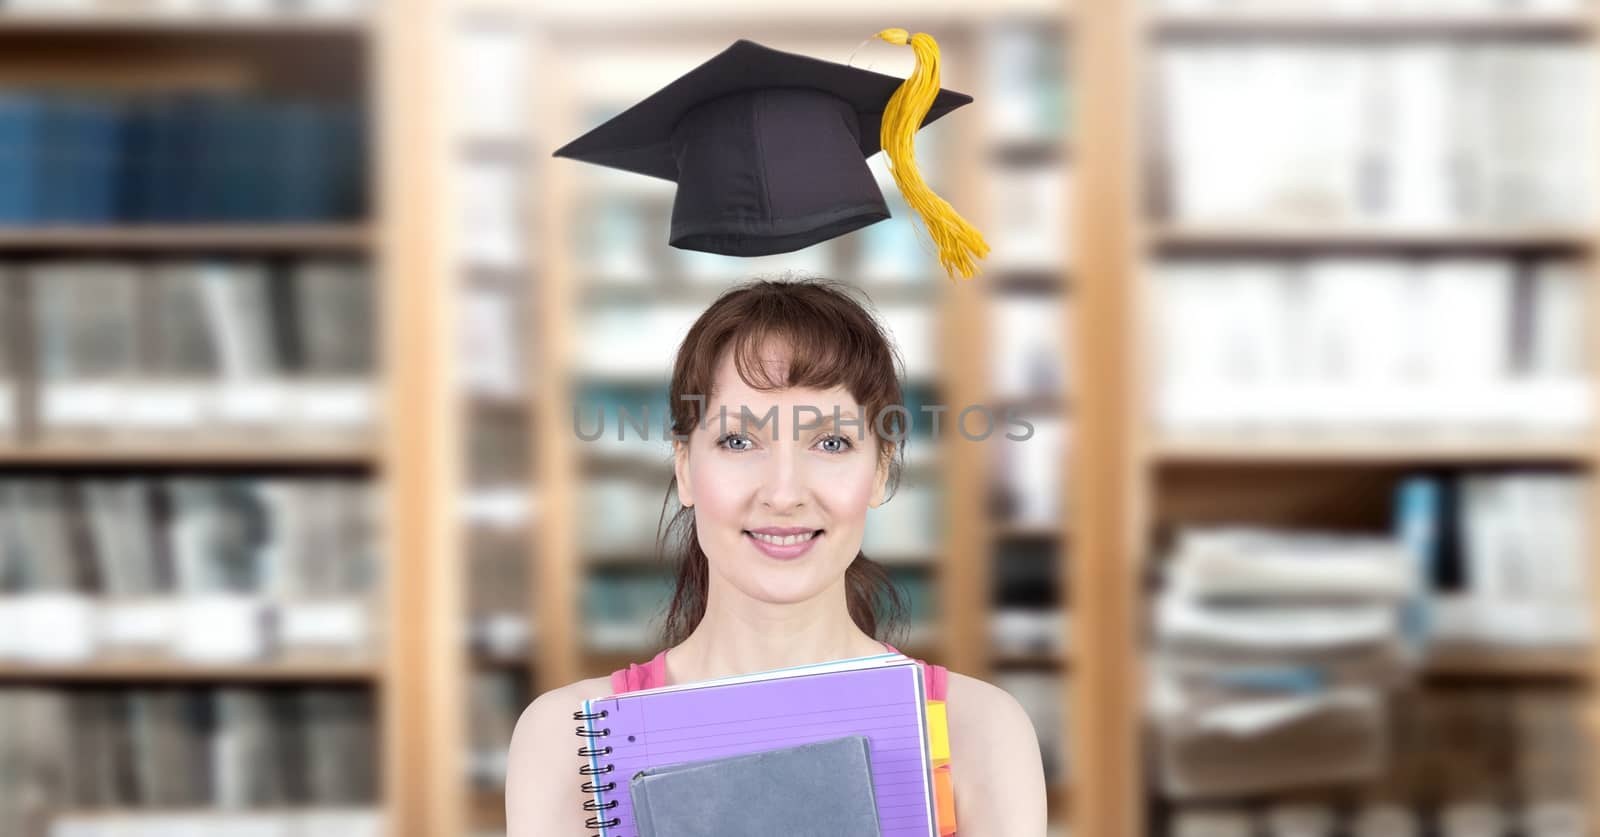 Digital composite of Student mature woman in education library with graduation hat